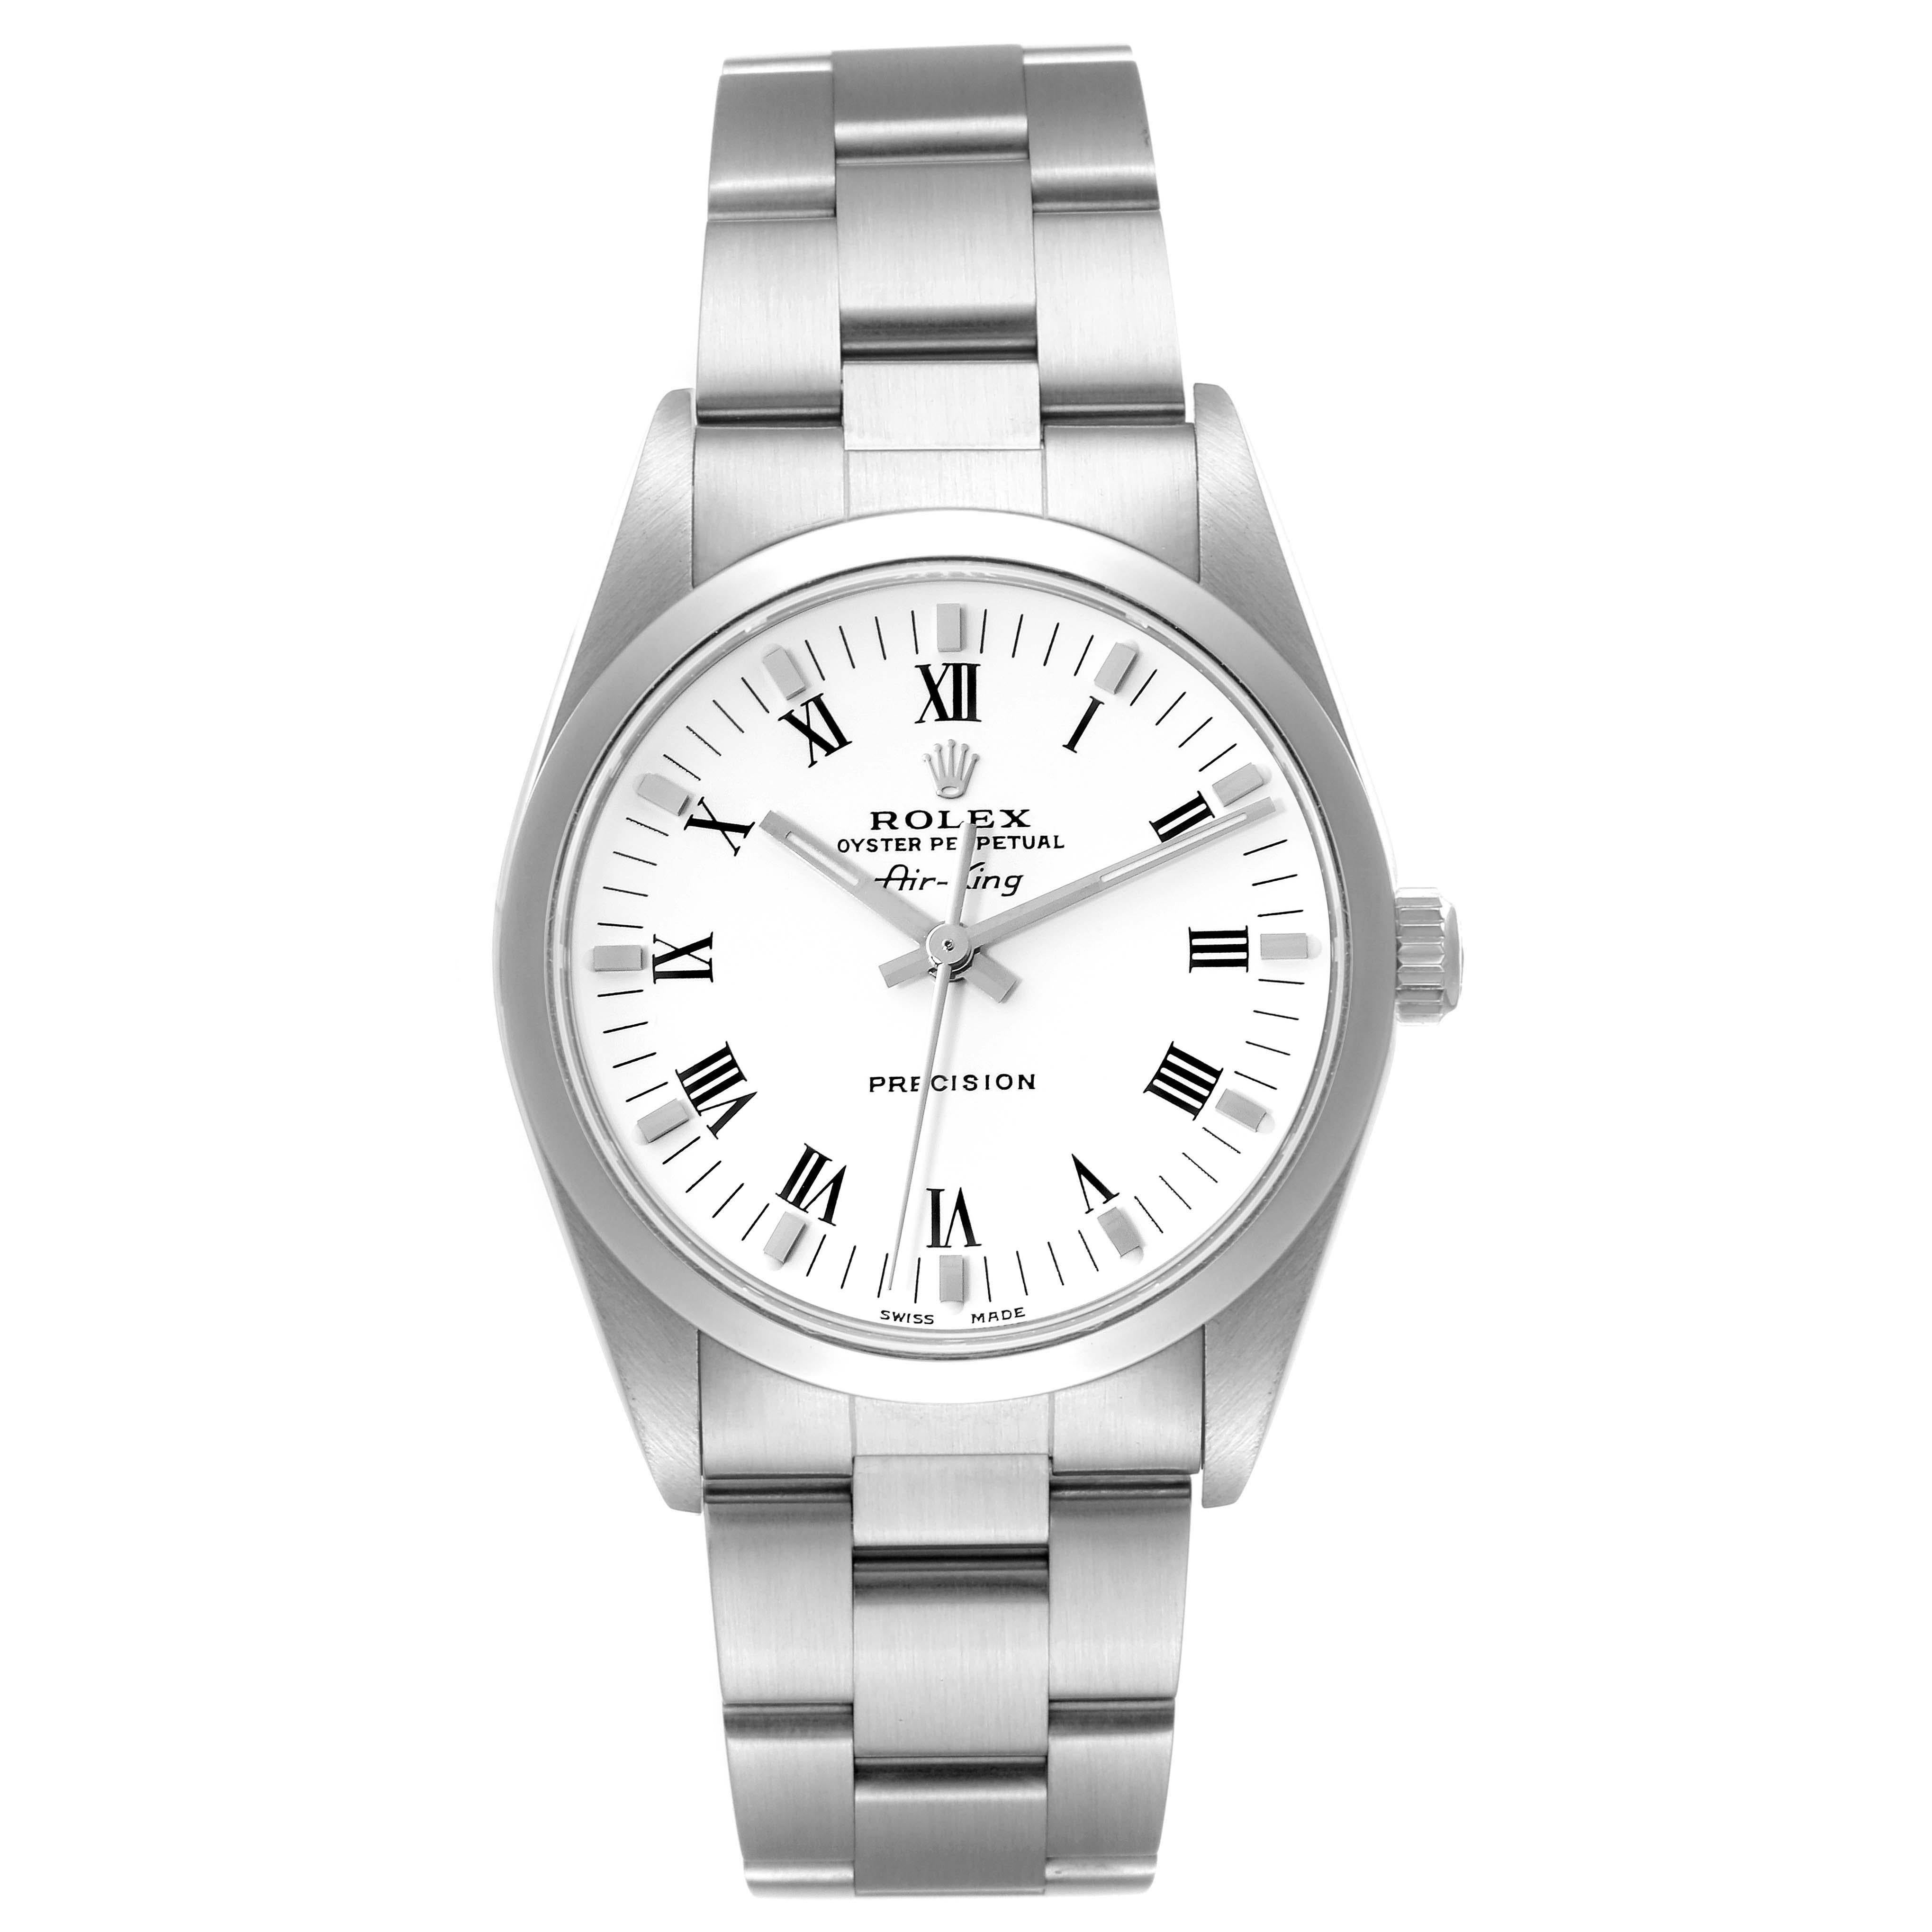 Rolex Air King 34mm White Roman Dial Domed Bezel Steel Mens Watch 14000. Officially certified chronometer self-winding movement. Stainless steel case 34 mm in diameter. Rolex logo on a crown. Stainless steel smooth domed bezel. Scratch resistant